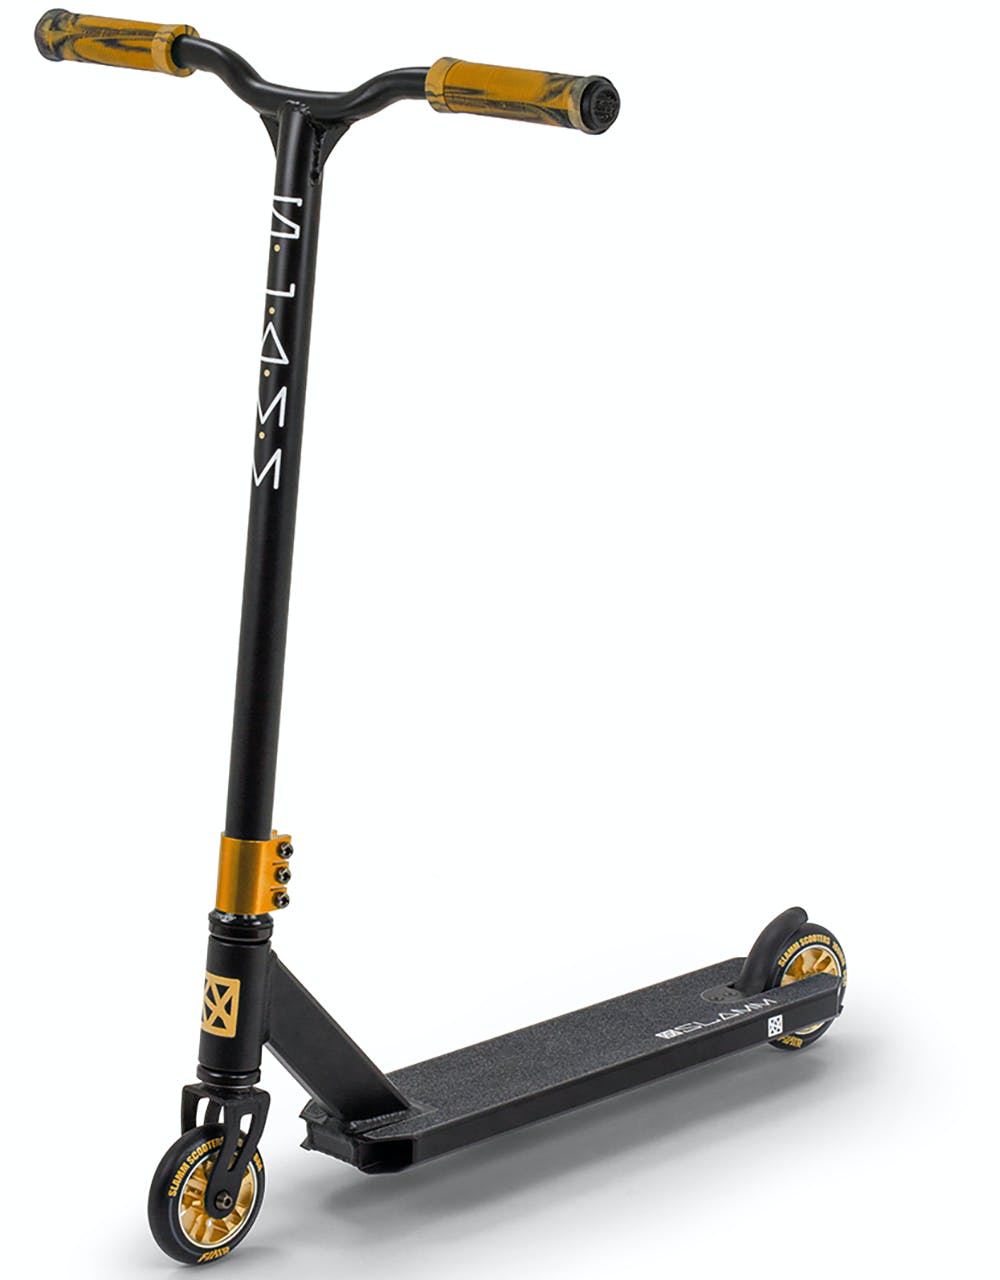 Slamm Classic VII Complete Scooter - Black/Gold